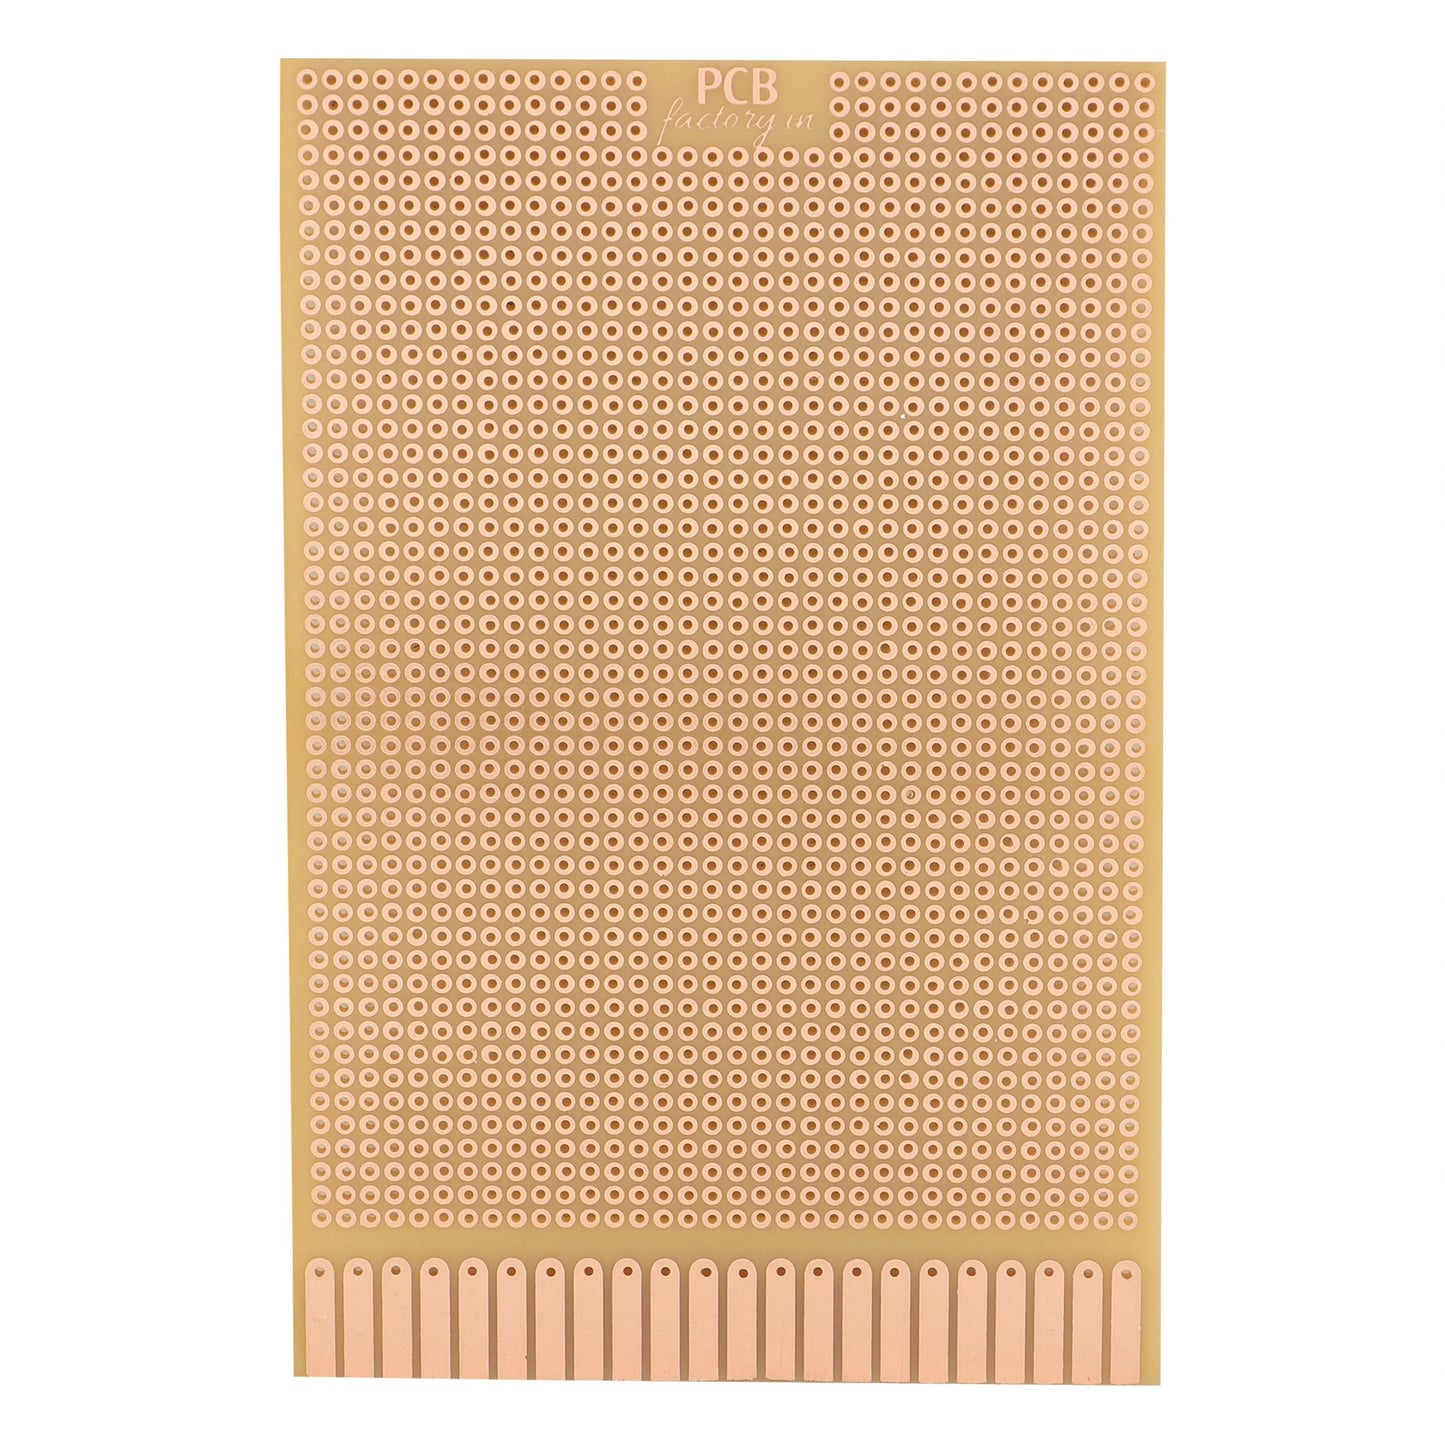 General Purpose PCB Breadboard – FR2 (Set of 15) (140mmx90mm) – with holes